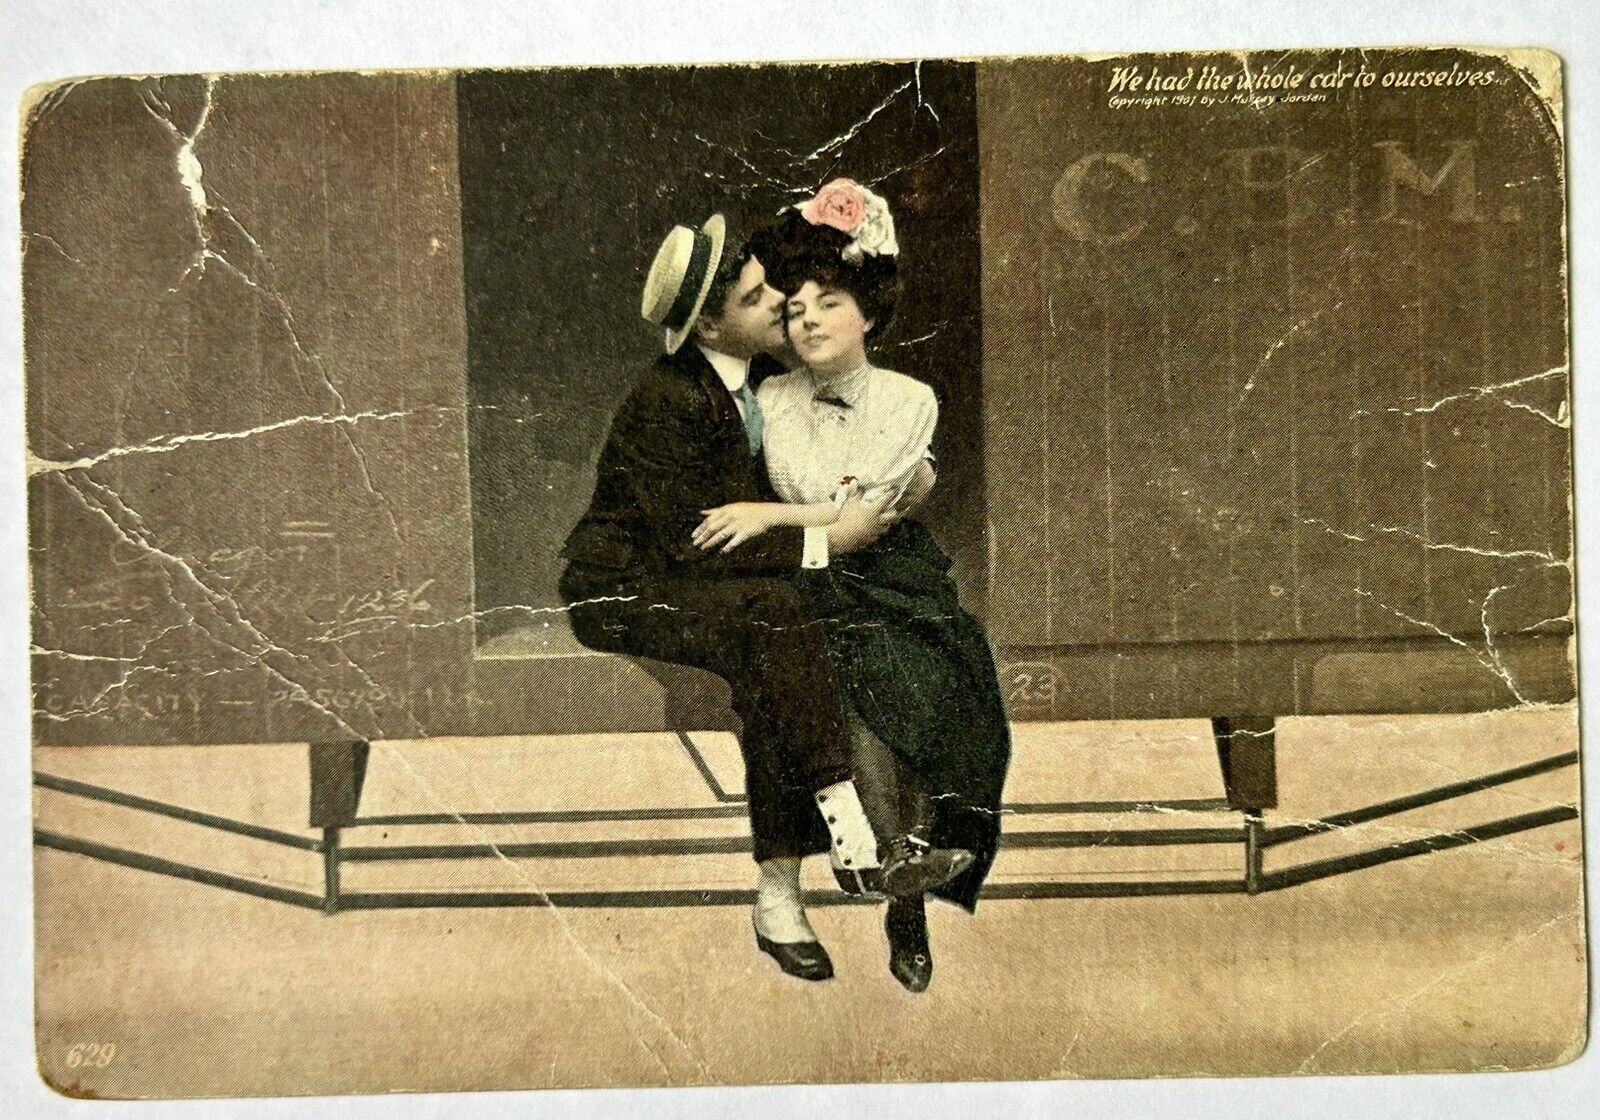 We Had The Whole Car To Ourselves. Love And Romance Postcard. J. Mundy Jordan